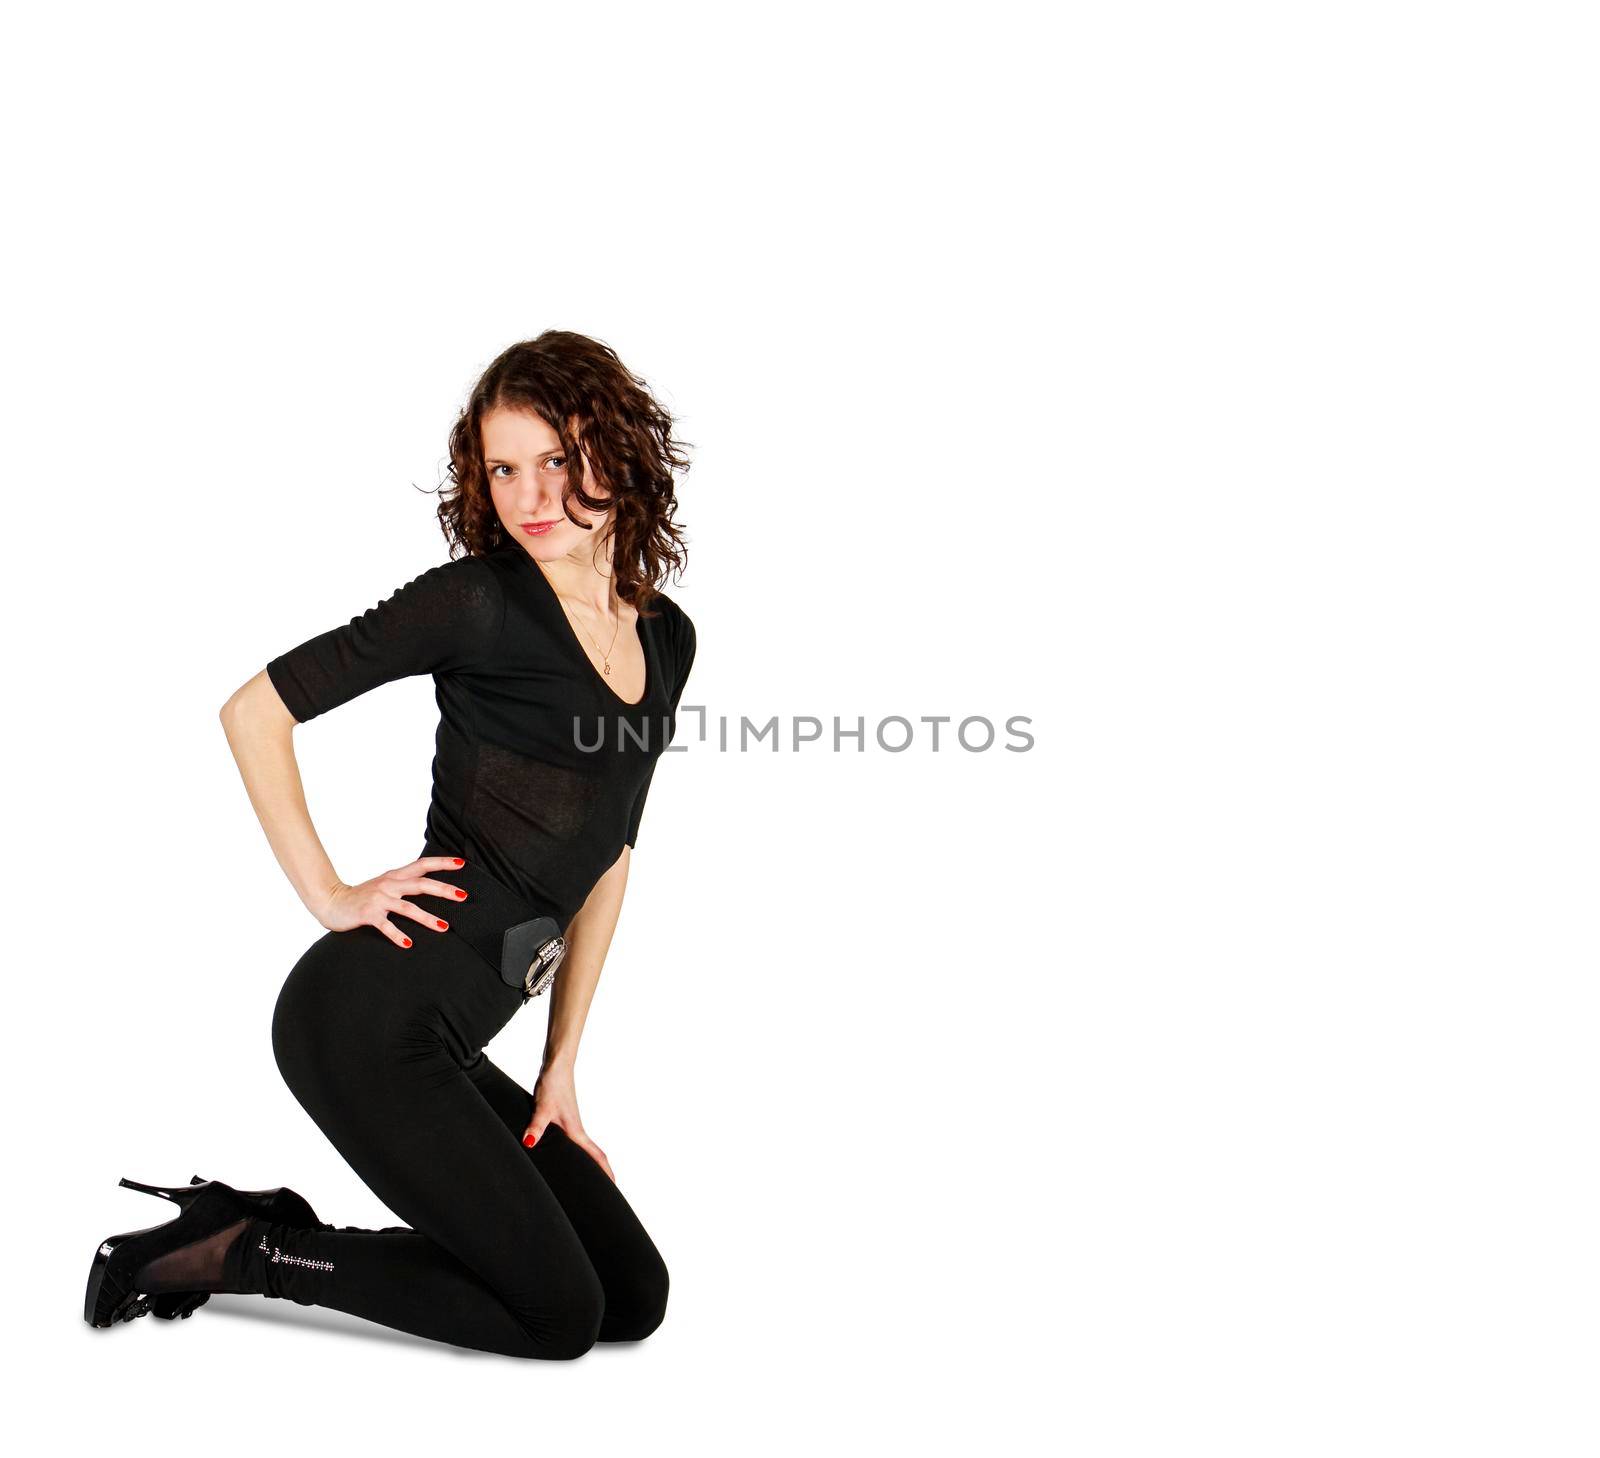 young beautiful woman in black suit posing crouching in studio on white background